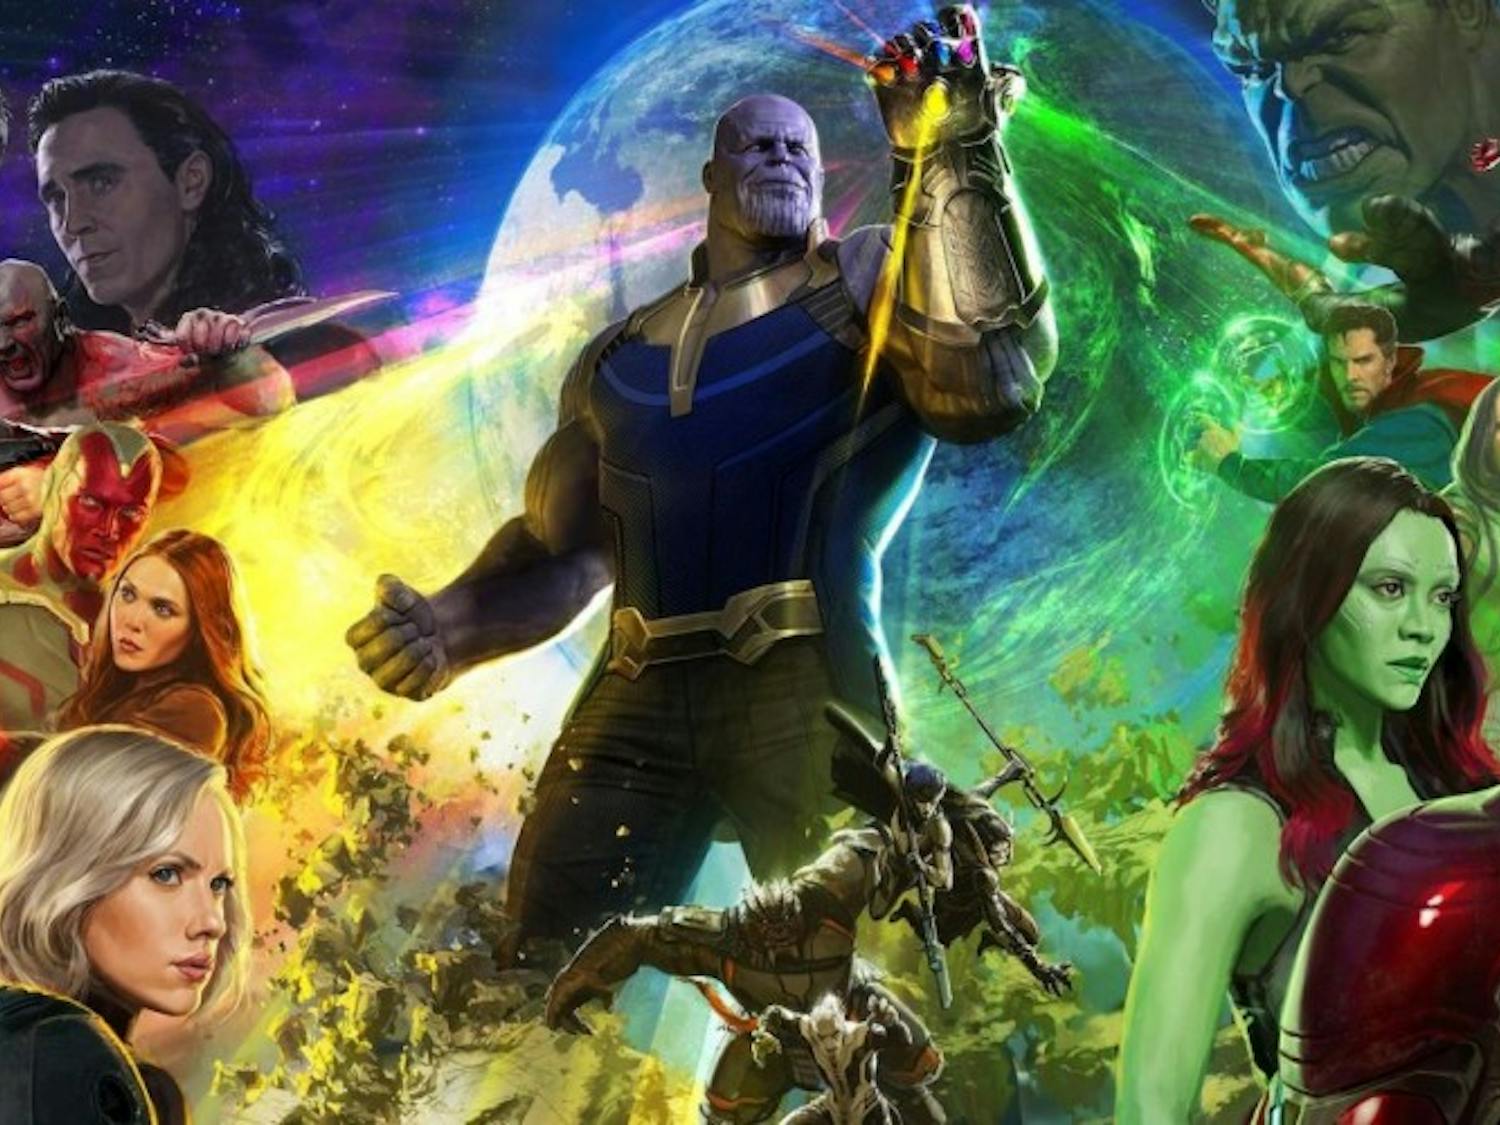 The trailer for&nbsp;"Avengers: Infinity War" was released Dec. 1, with the film hitting theaters May 4 of next year.